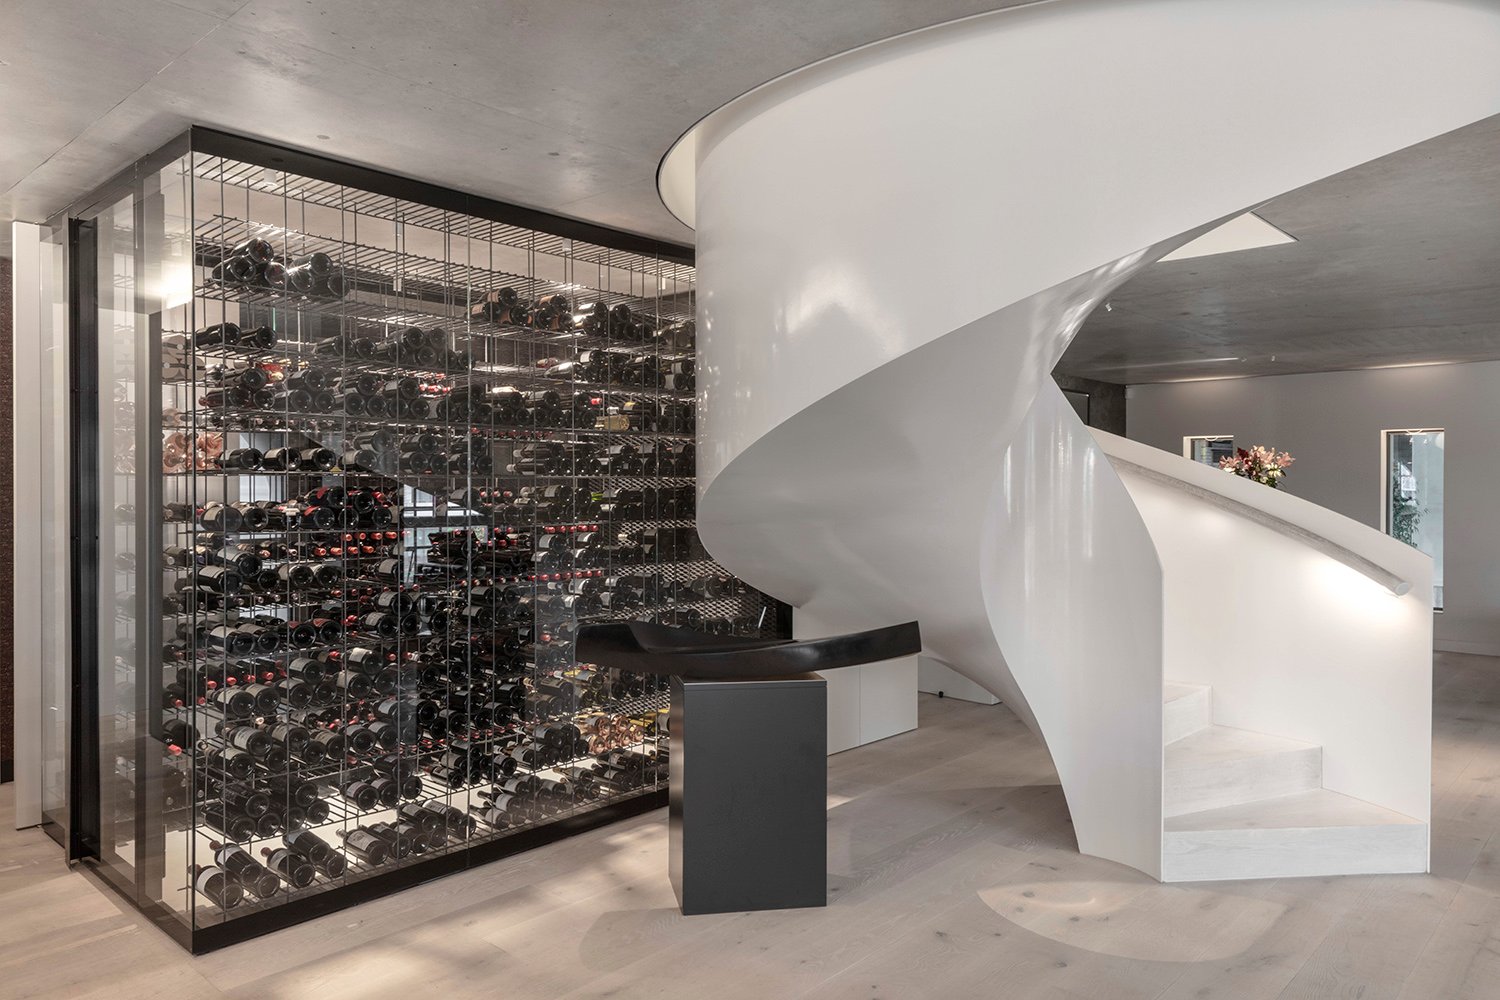 Transparent glass wine room to help bring “lightness” within the space. | Delphine Burtin